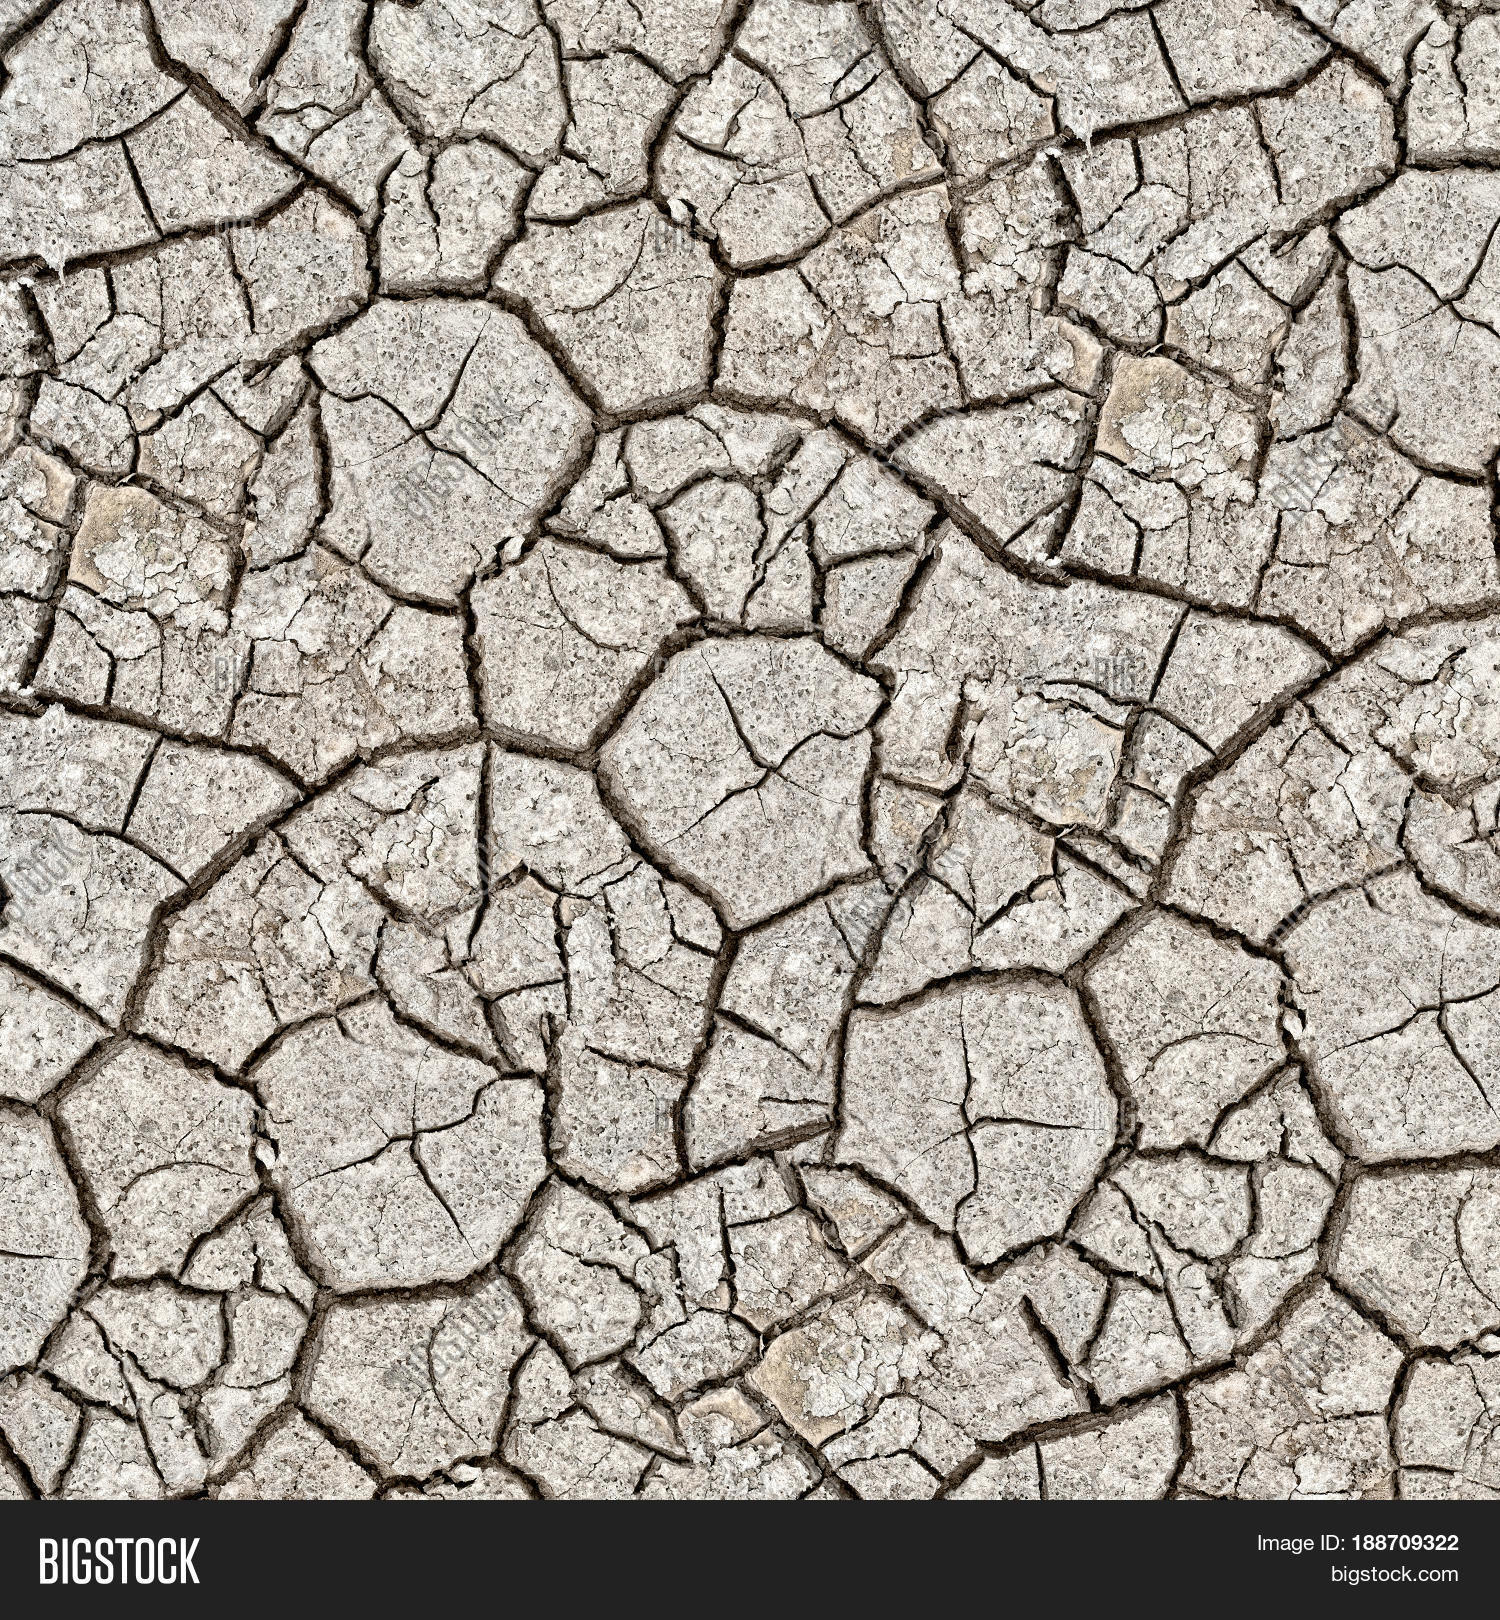 Texture Cracked Dry Surface Earth. Image & Photo | Bigstock